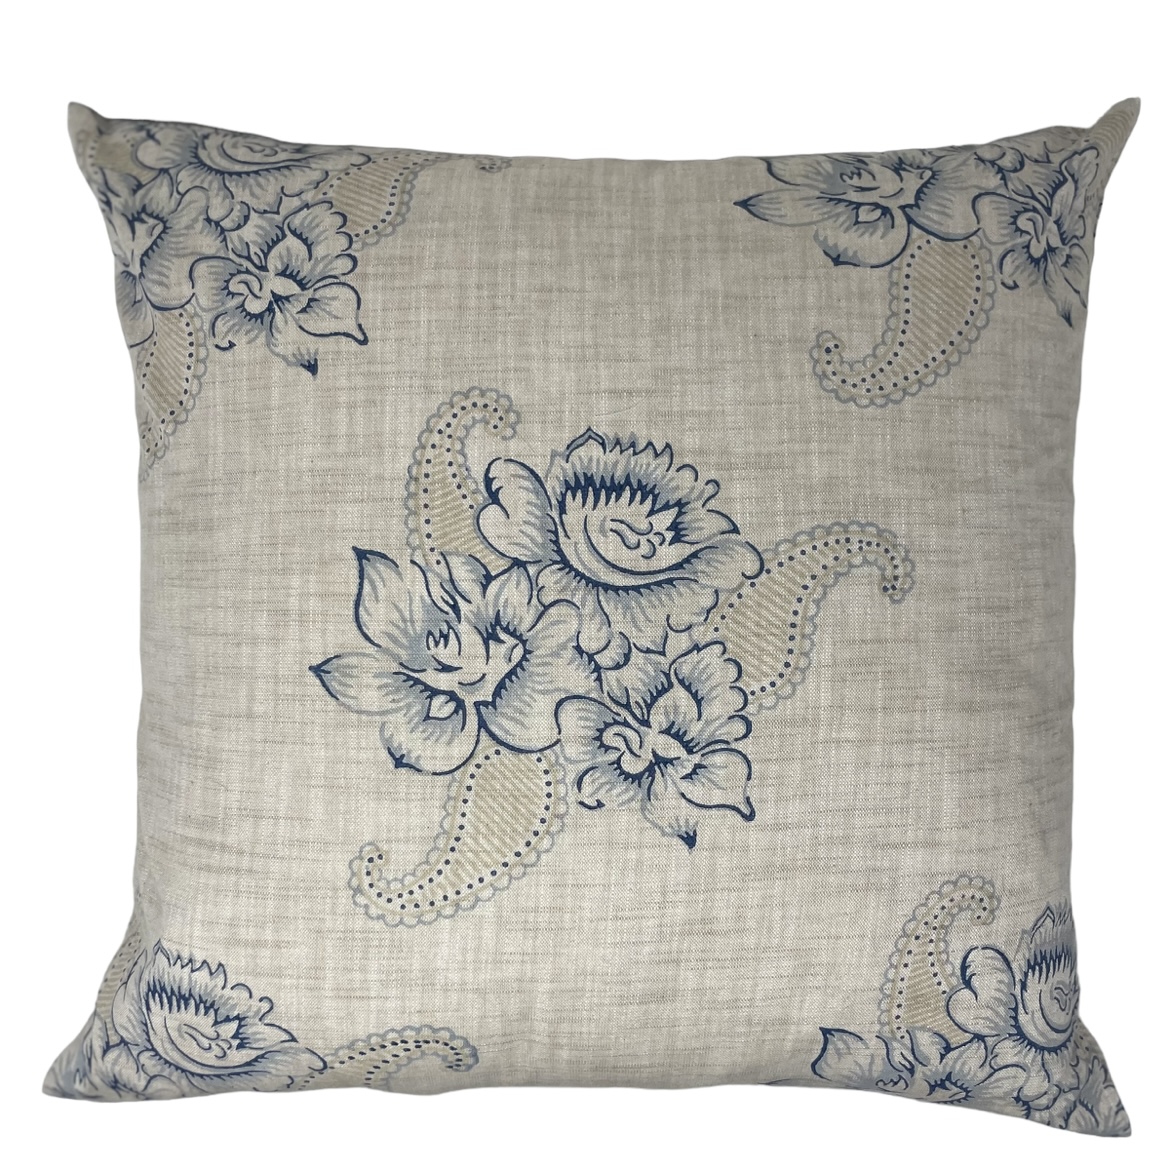 Pale & Interesting Roses and Paisley Cushion Cover  in Antique Blue 50 x 50 cm